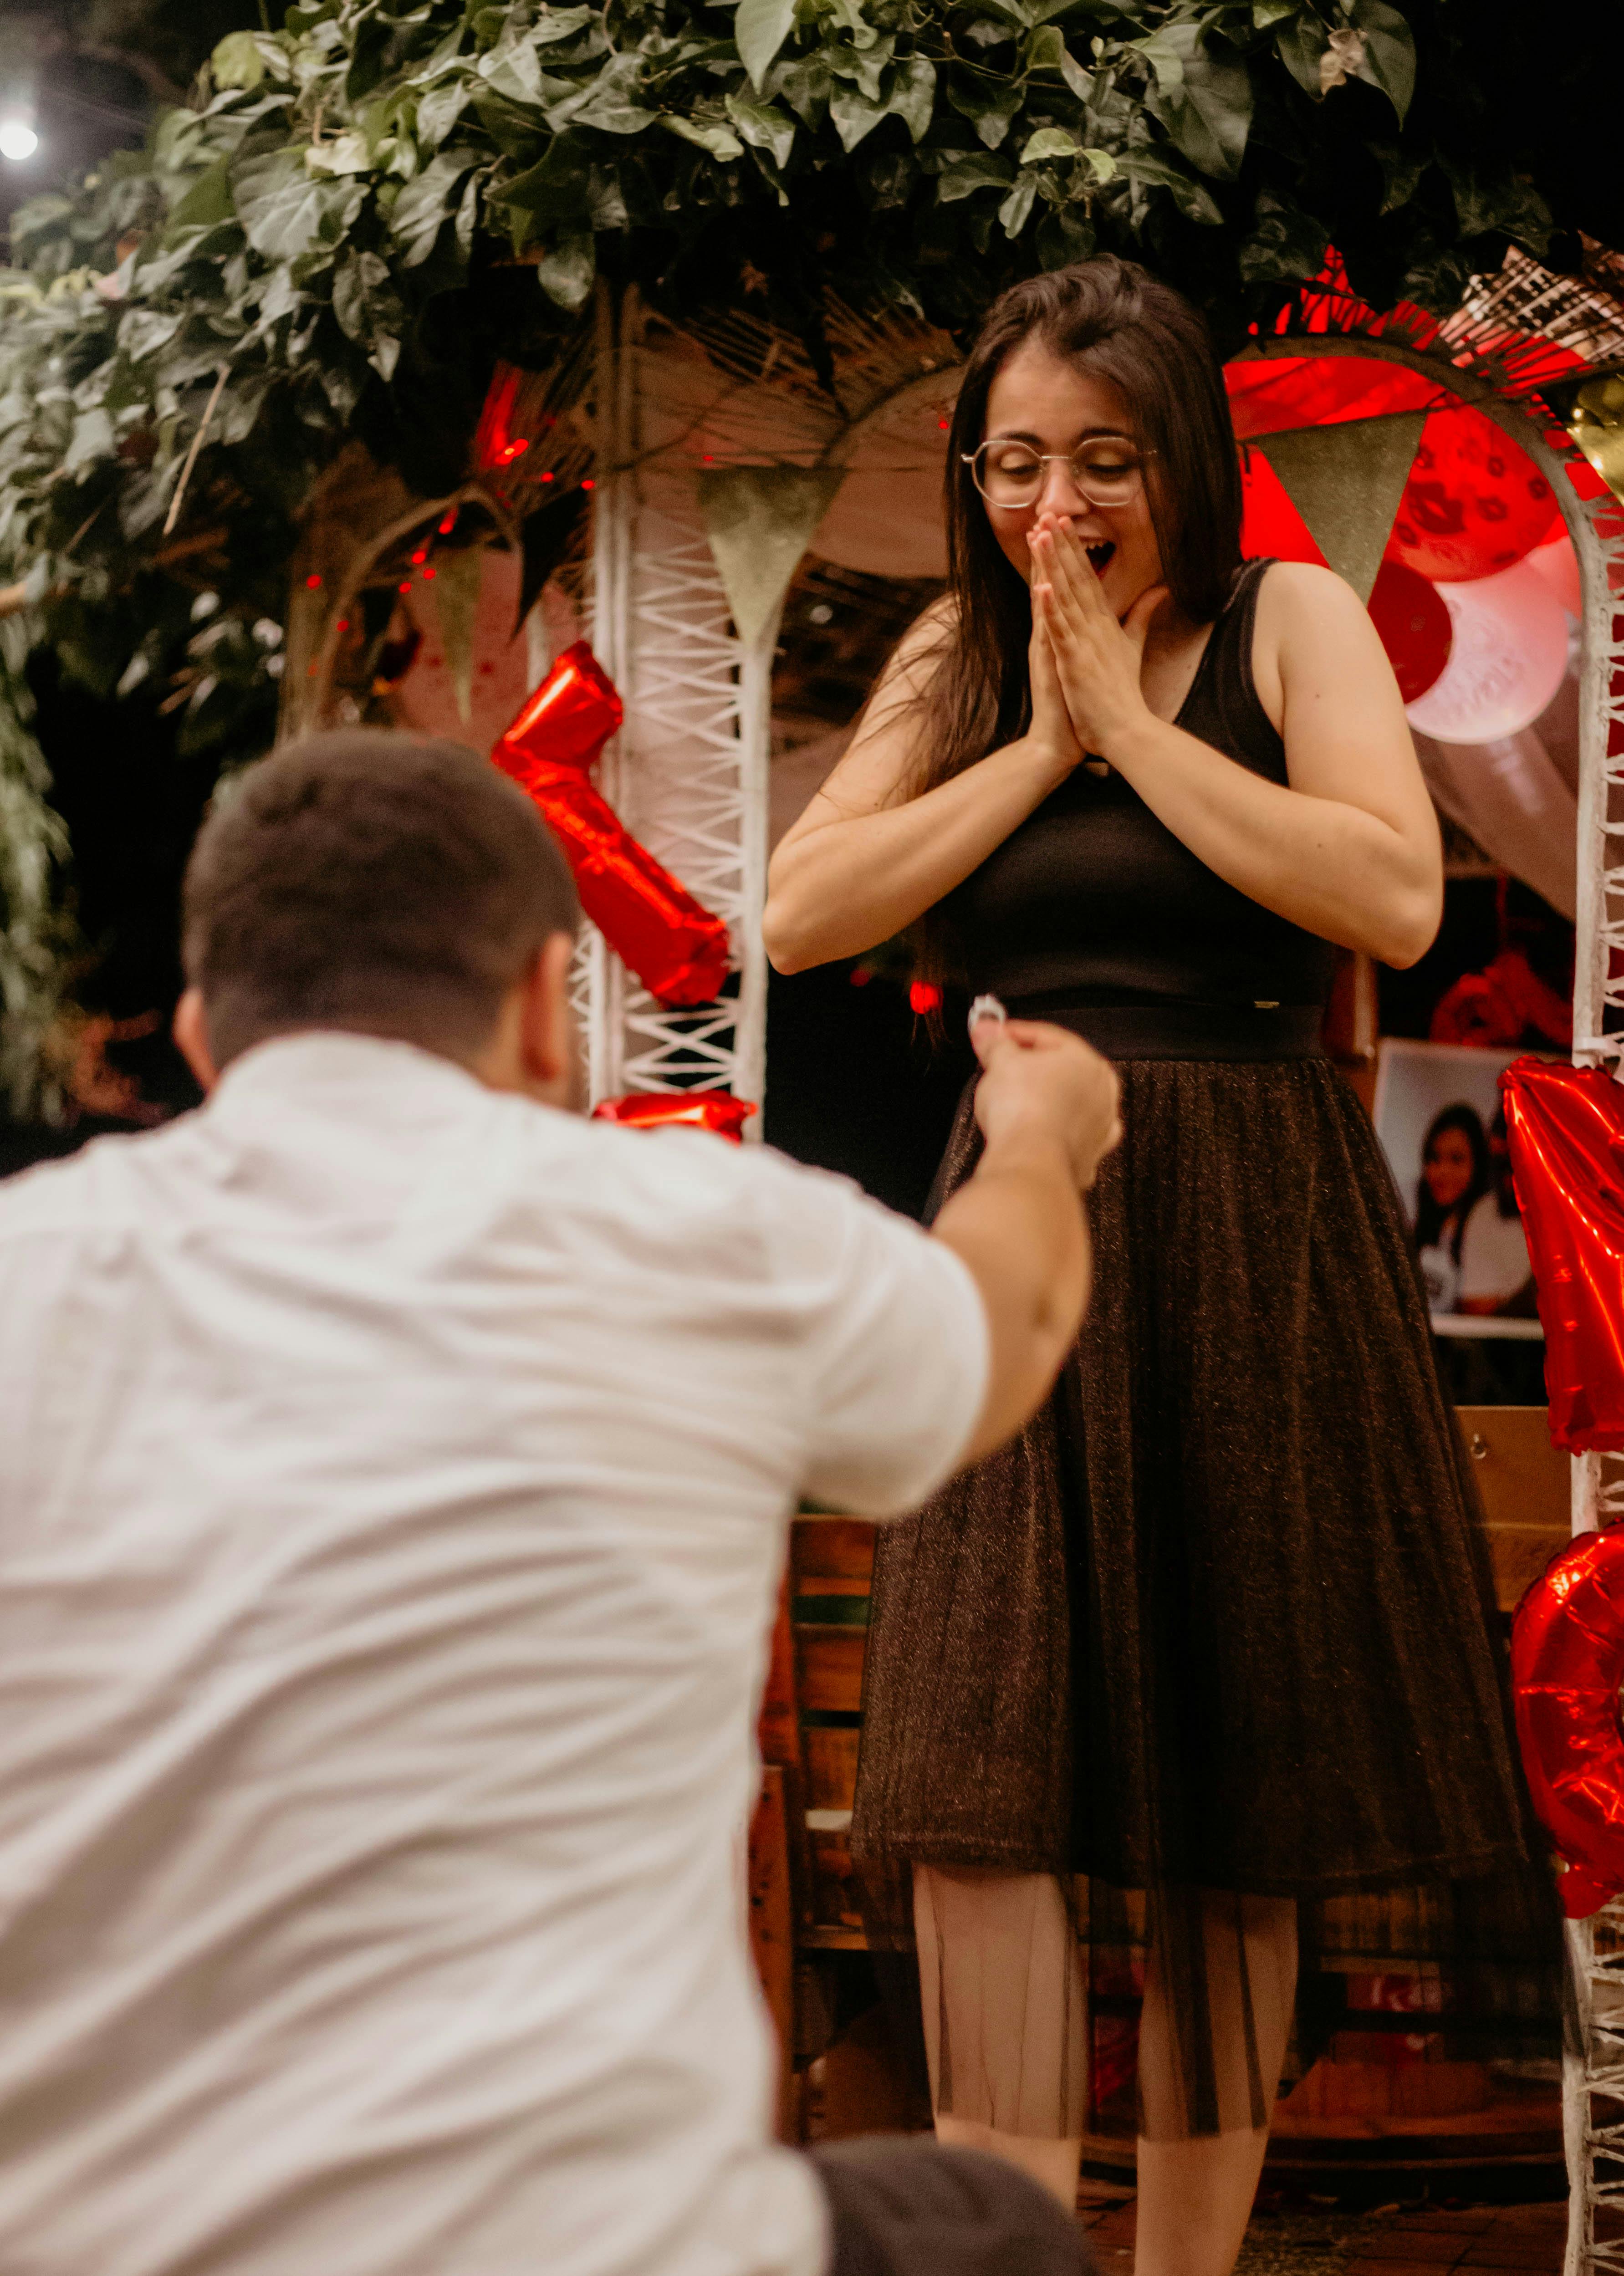 A man proposing while on one knee | Source: Pexels